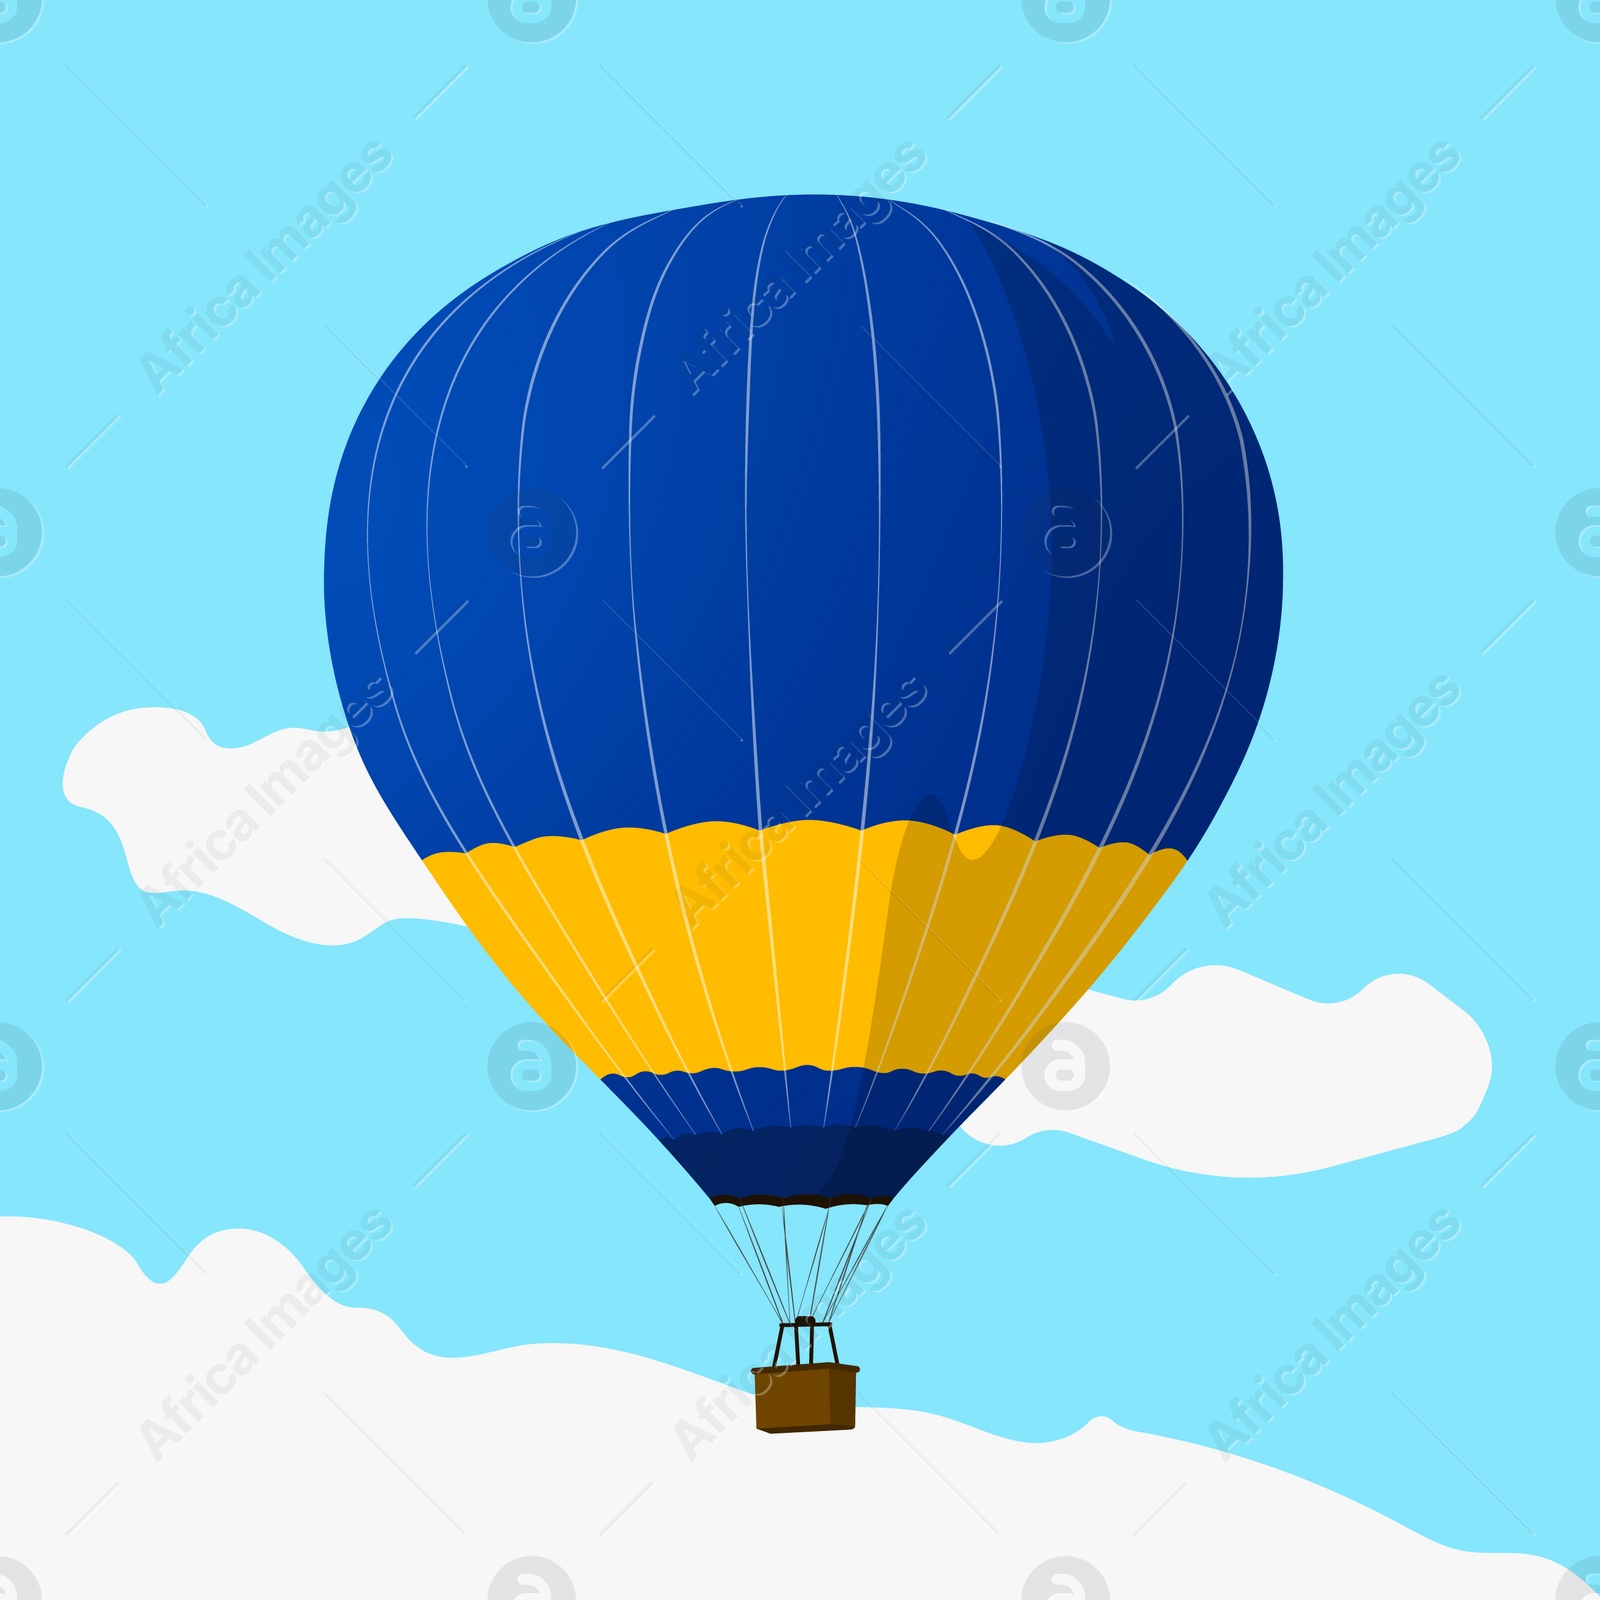 Illustration of Beautiful hot air balloon in blue sky